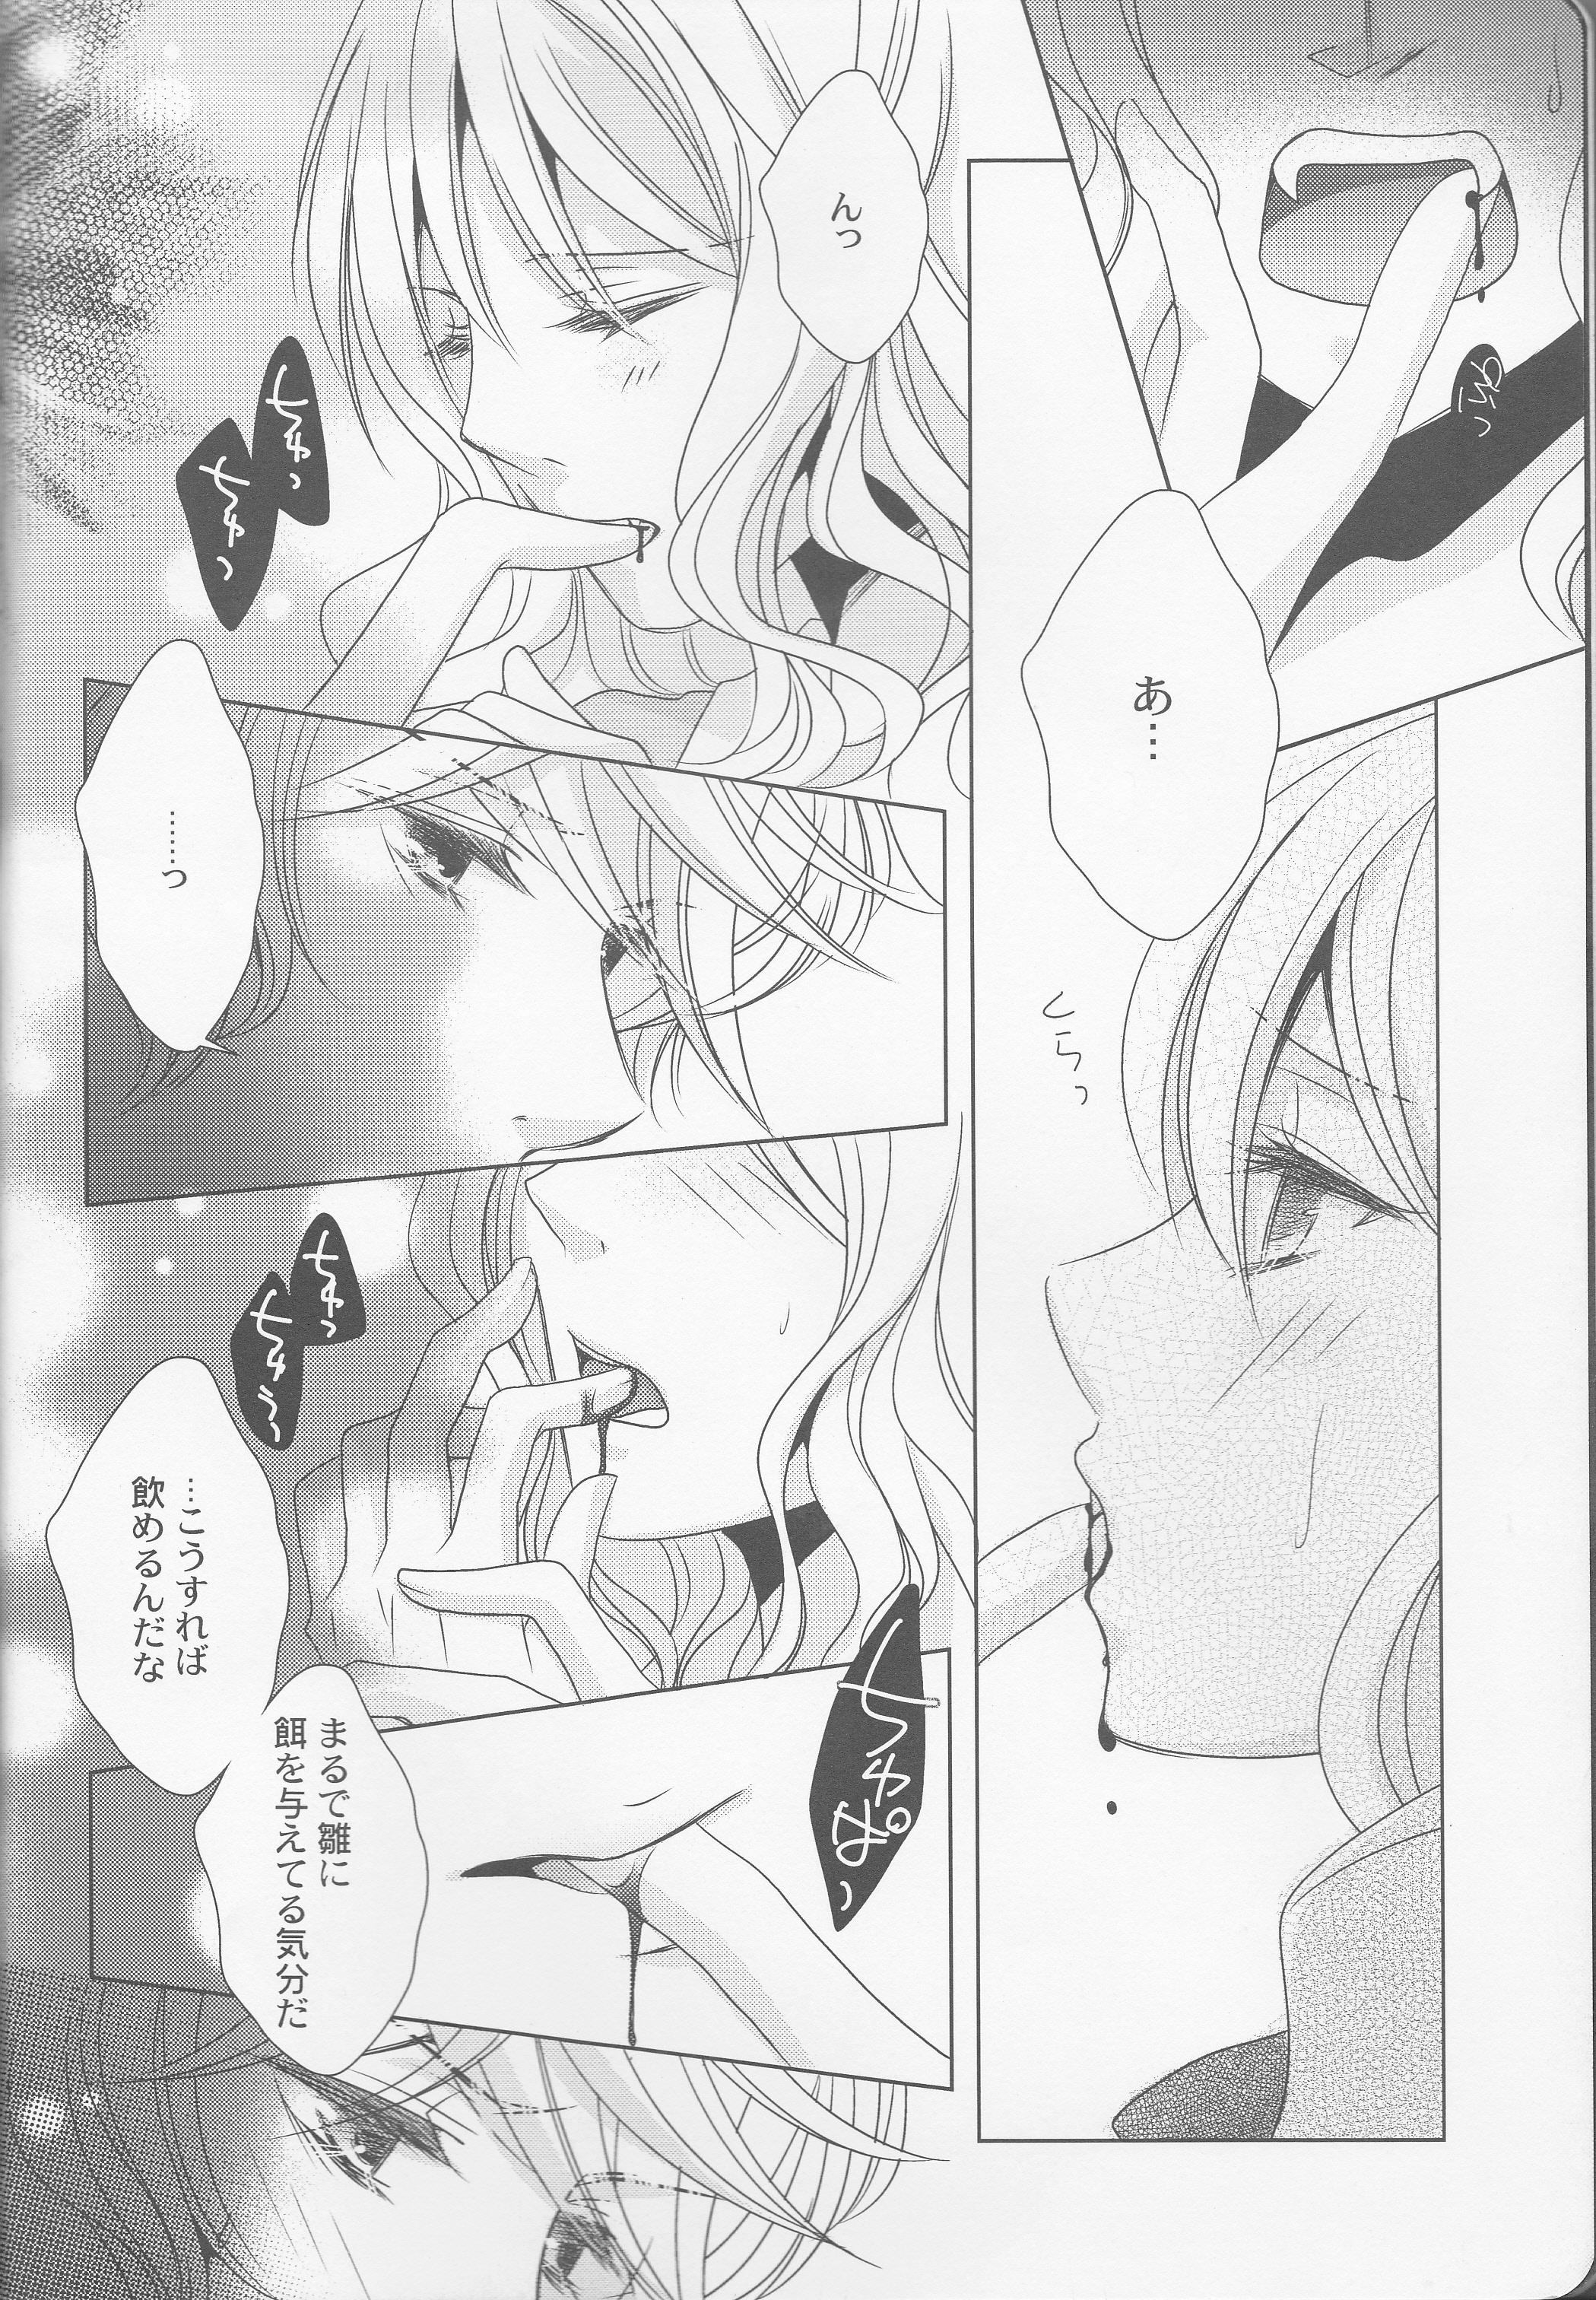 Young Petite Porn How to Blood - Diabolik lovers Por - Page 6